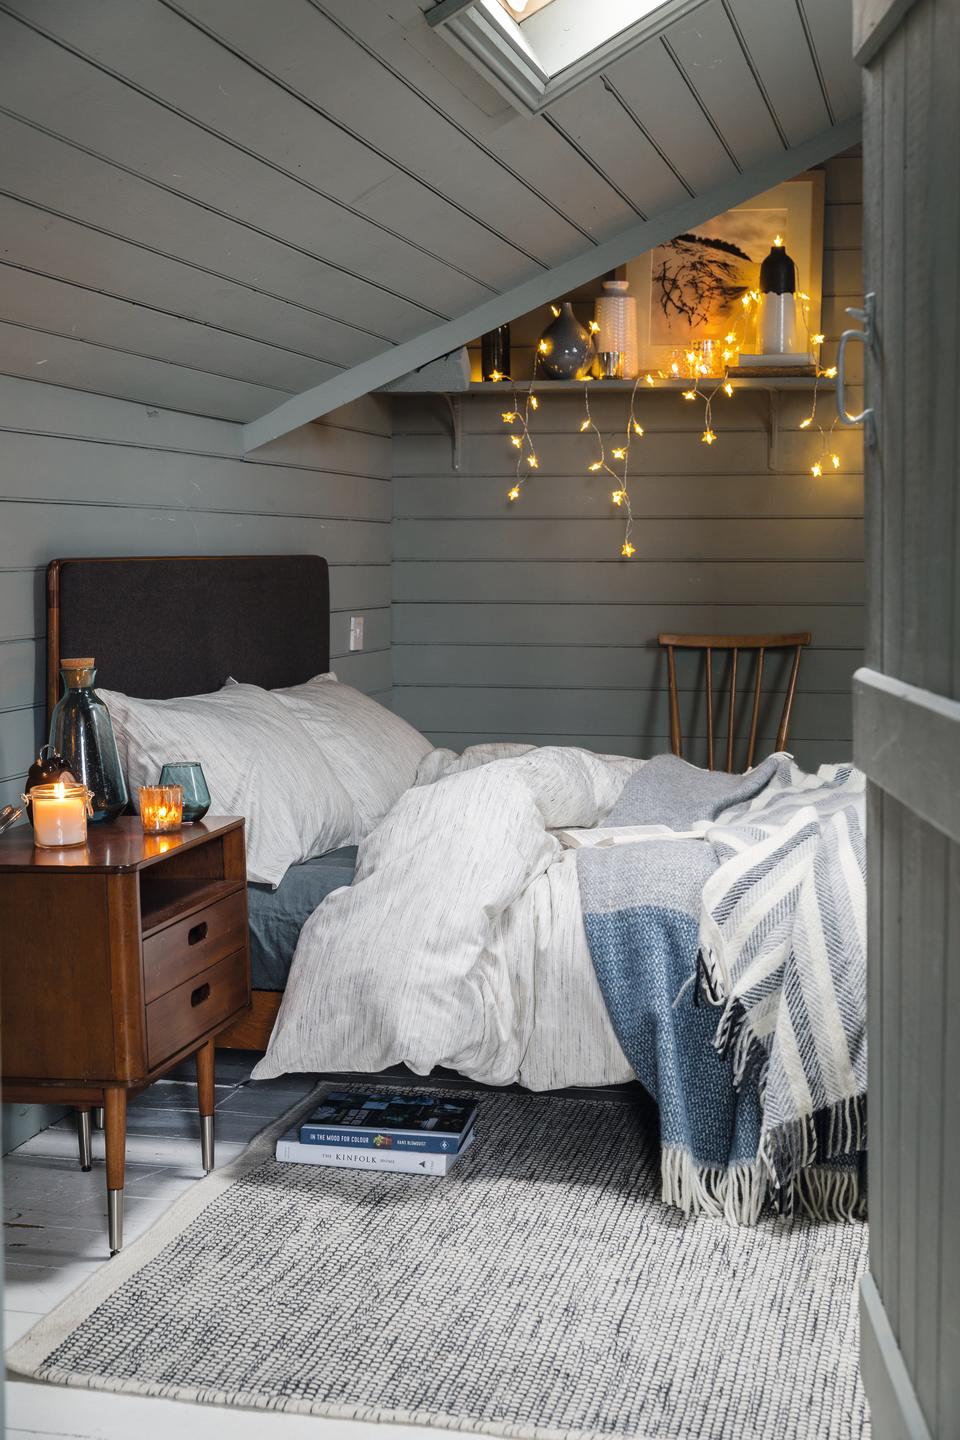 <p> And you just can&apos;t go wrong with bedroom fairy lights, can you? Perfect for adding ambiance to a bedroom you can literally string them up where ever to add a soft cozy glow.&#xA0; </p>